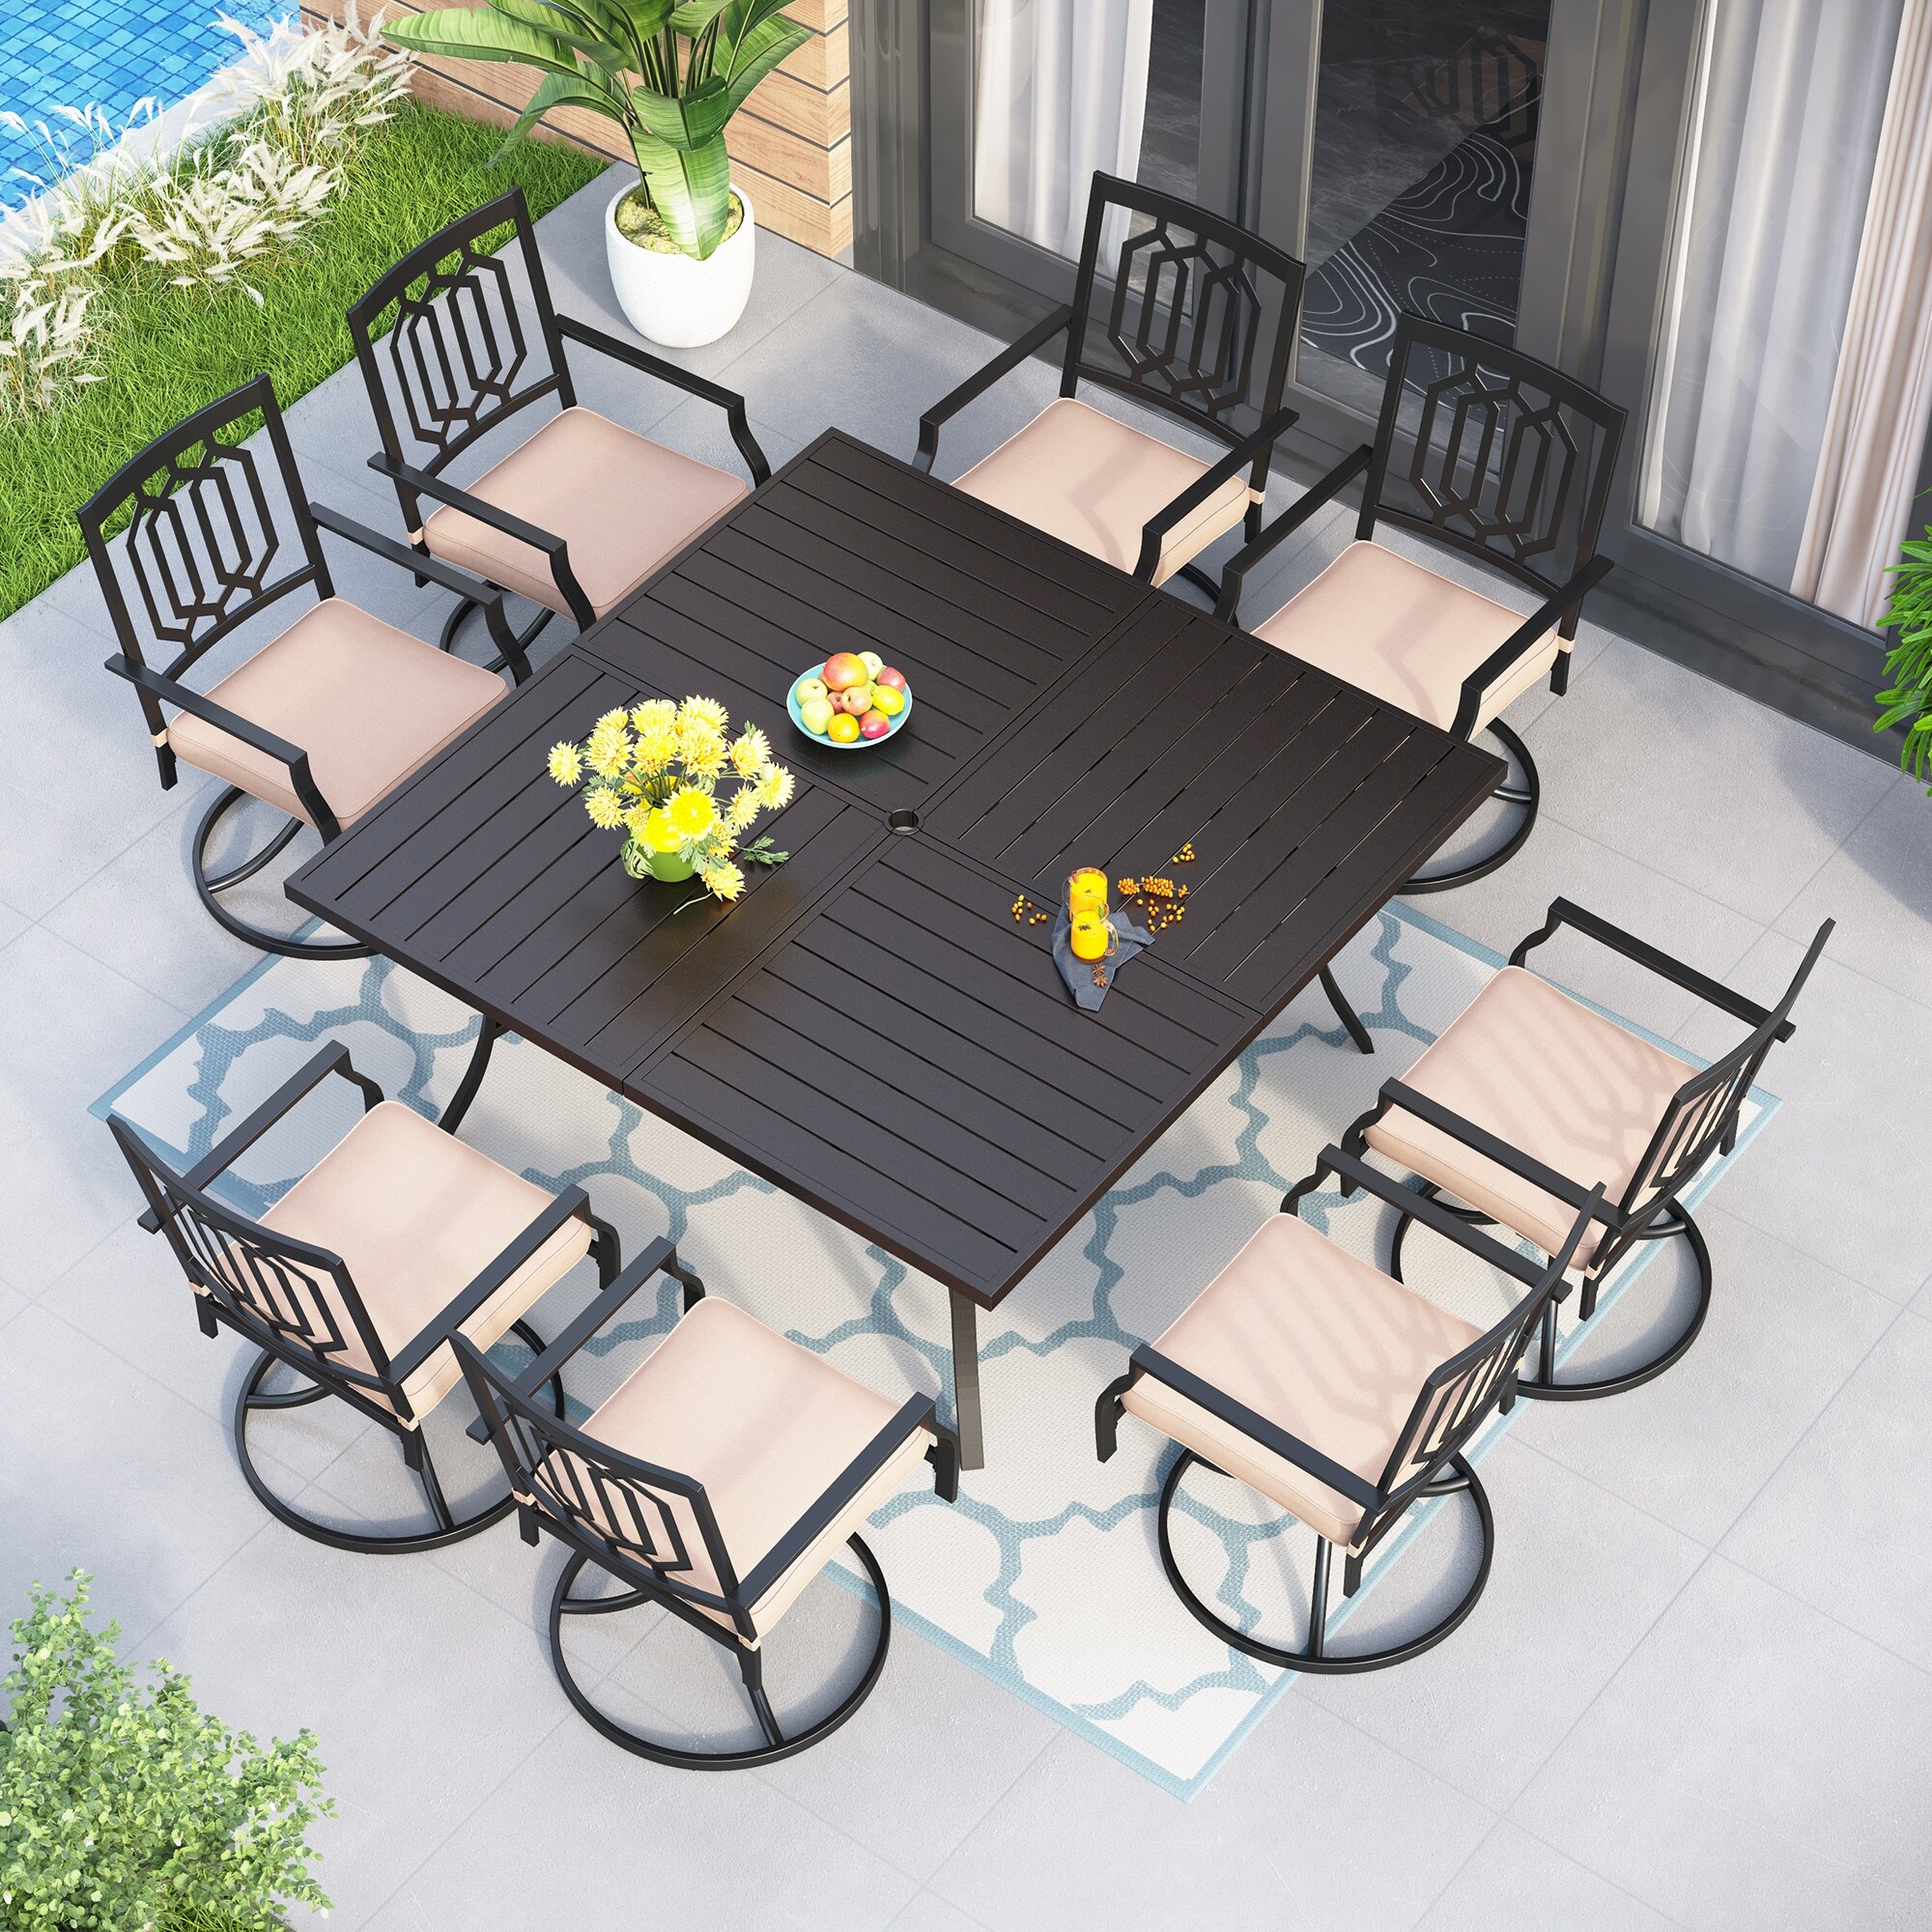 9-piece Patio Dining Set  60 Inch Square Metal Table And 8 Swivel Dining Chairs